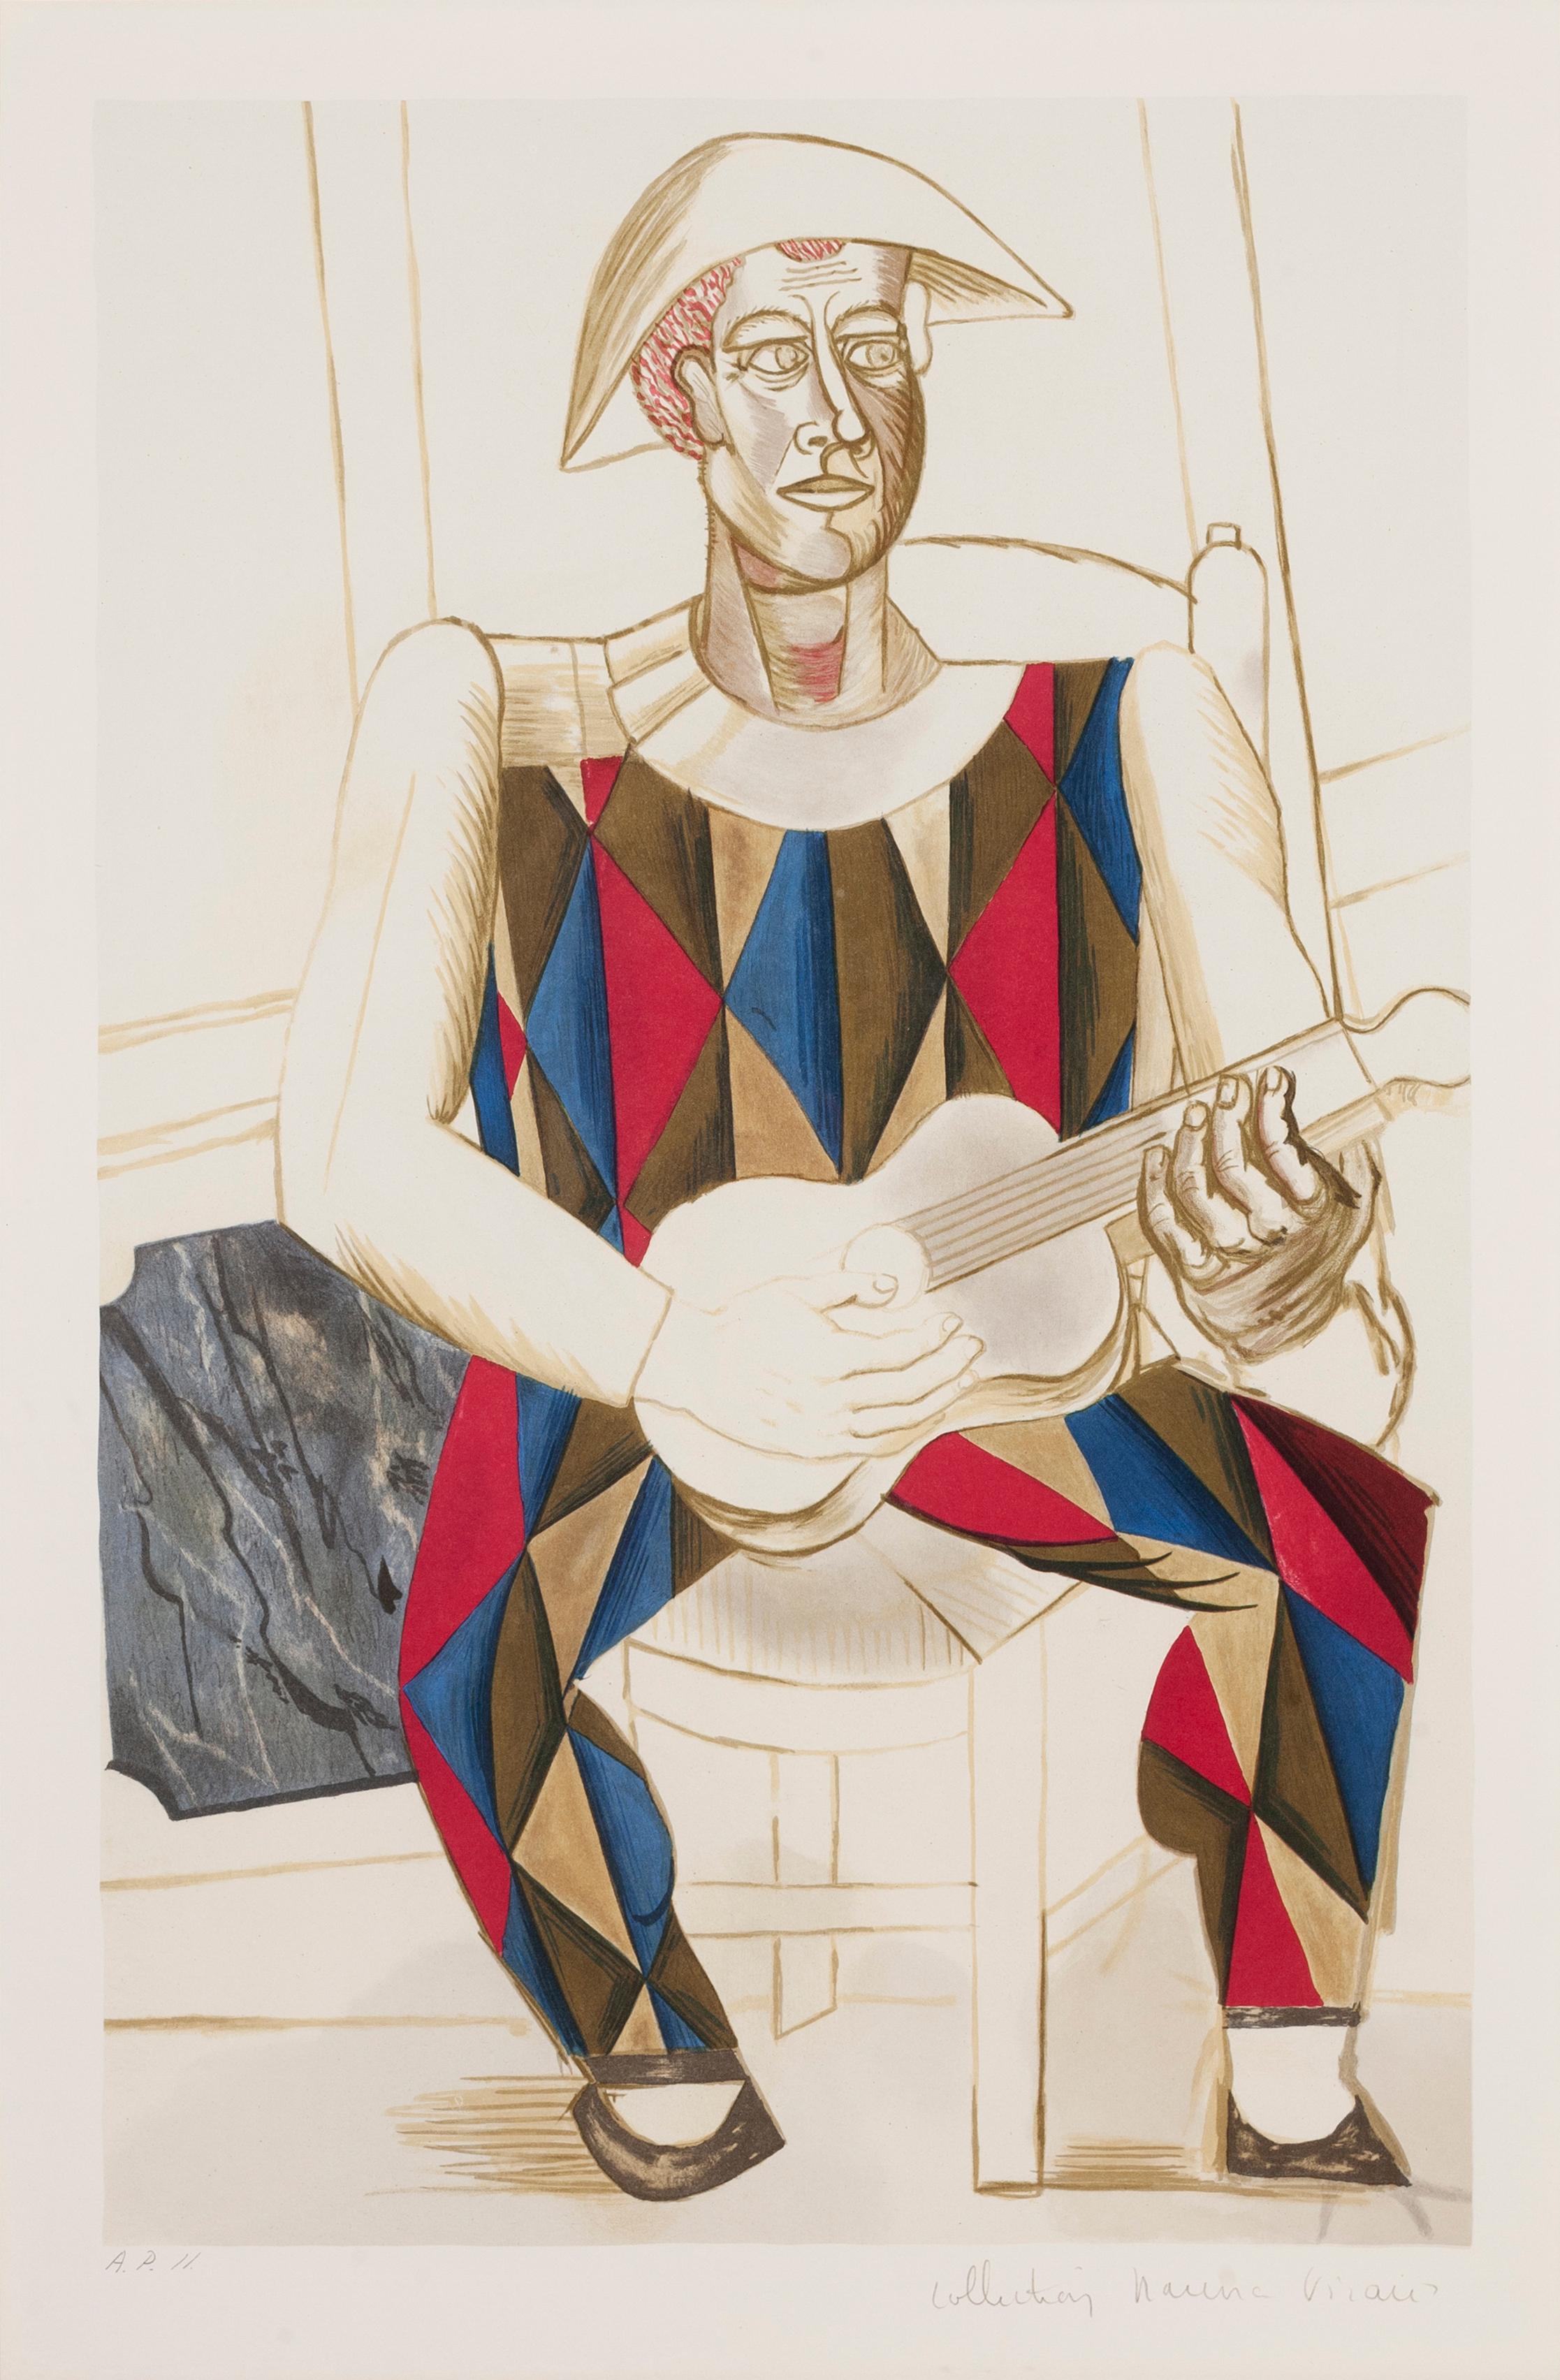 Arlequin - Print by Pablo Picasso